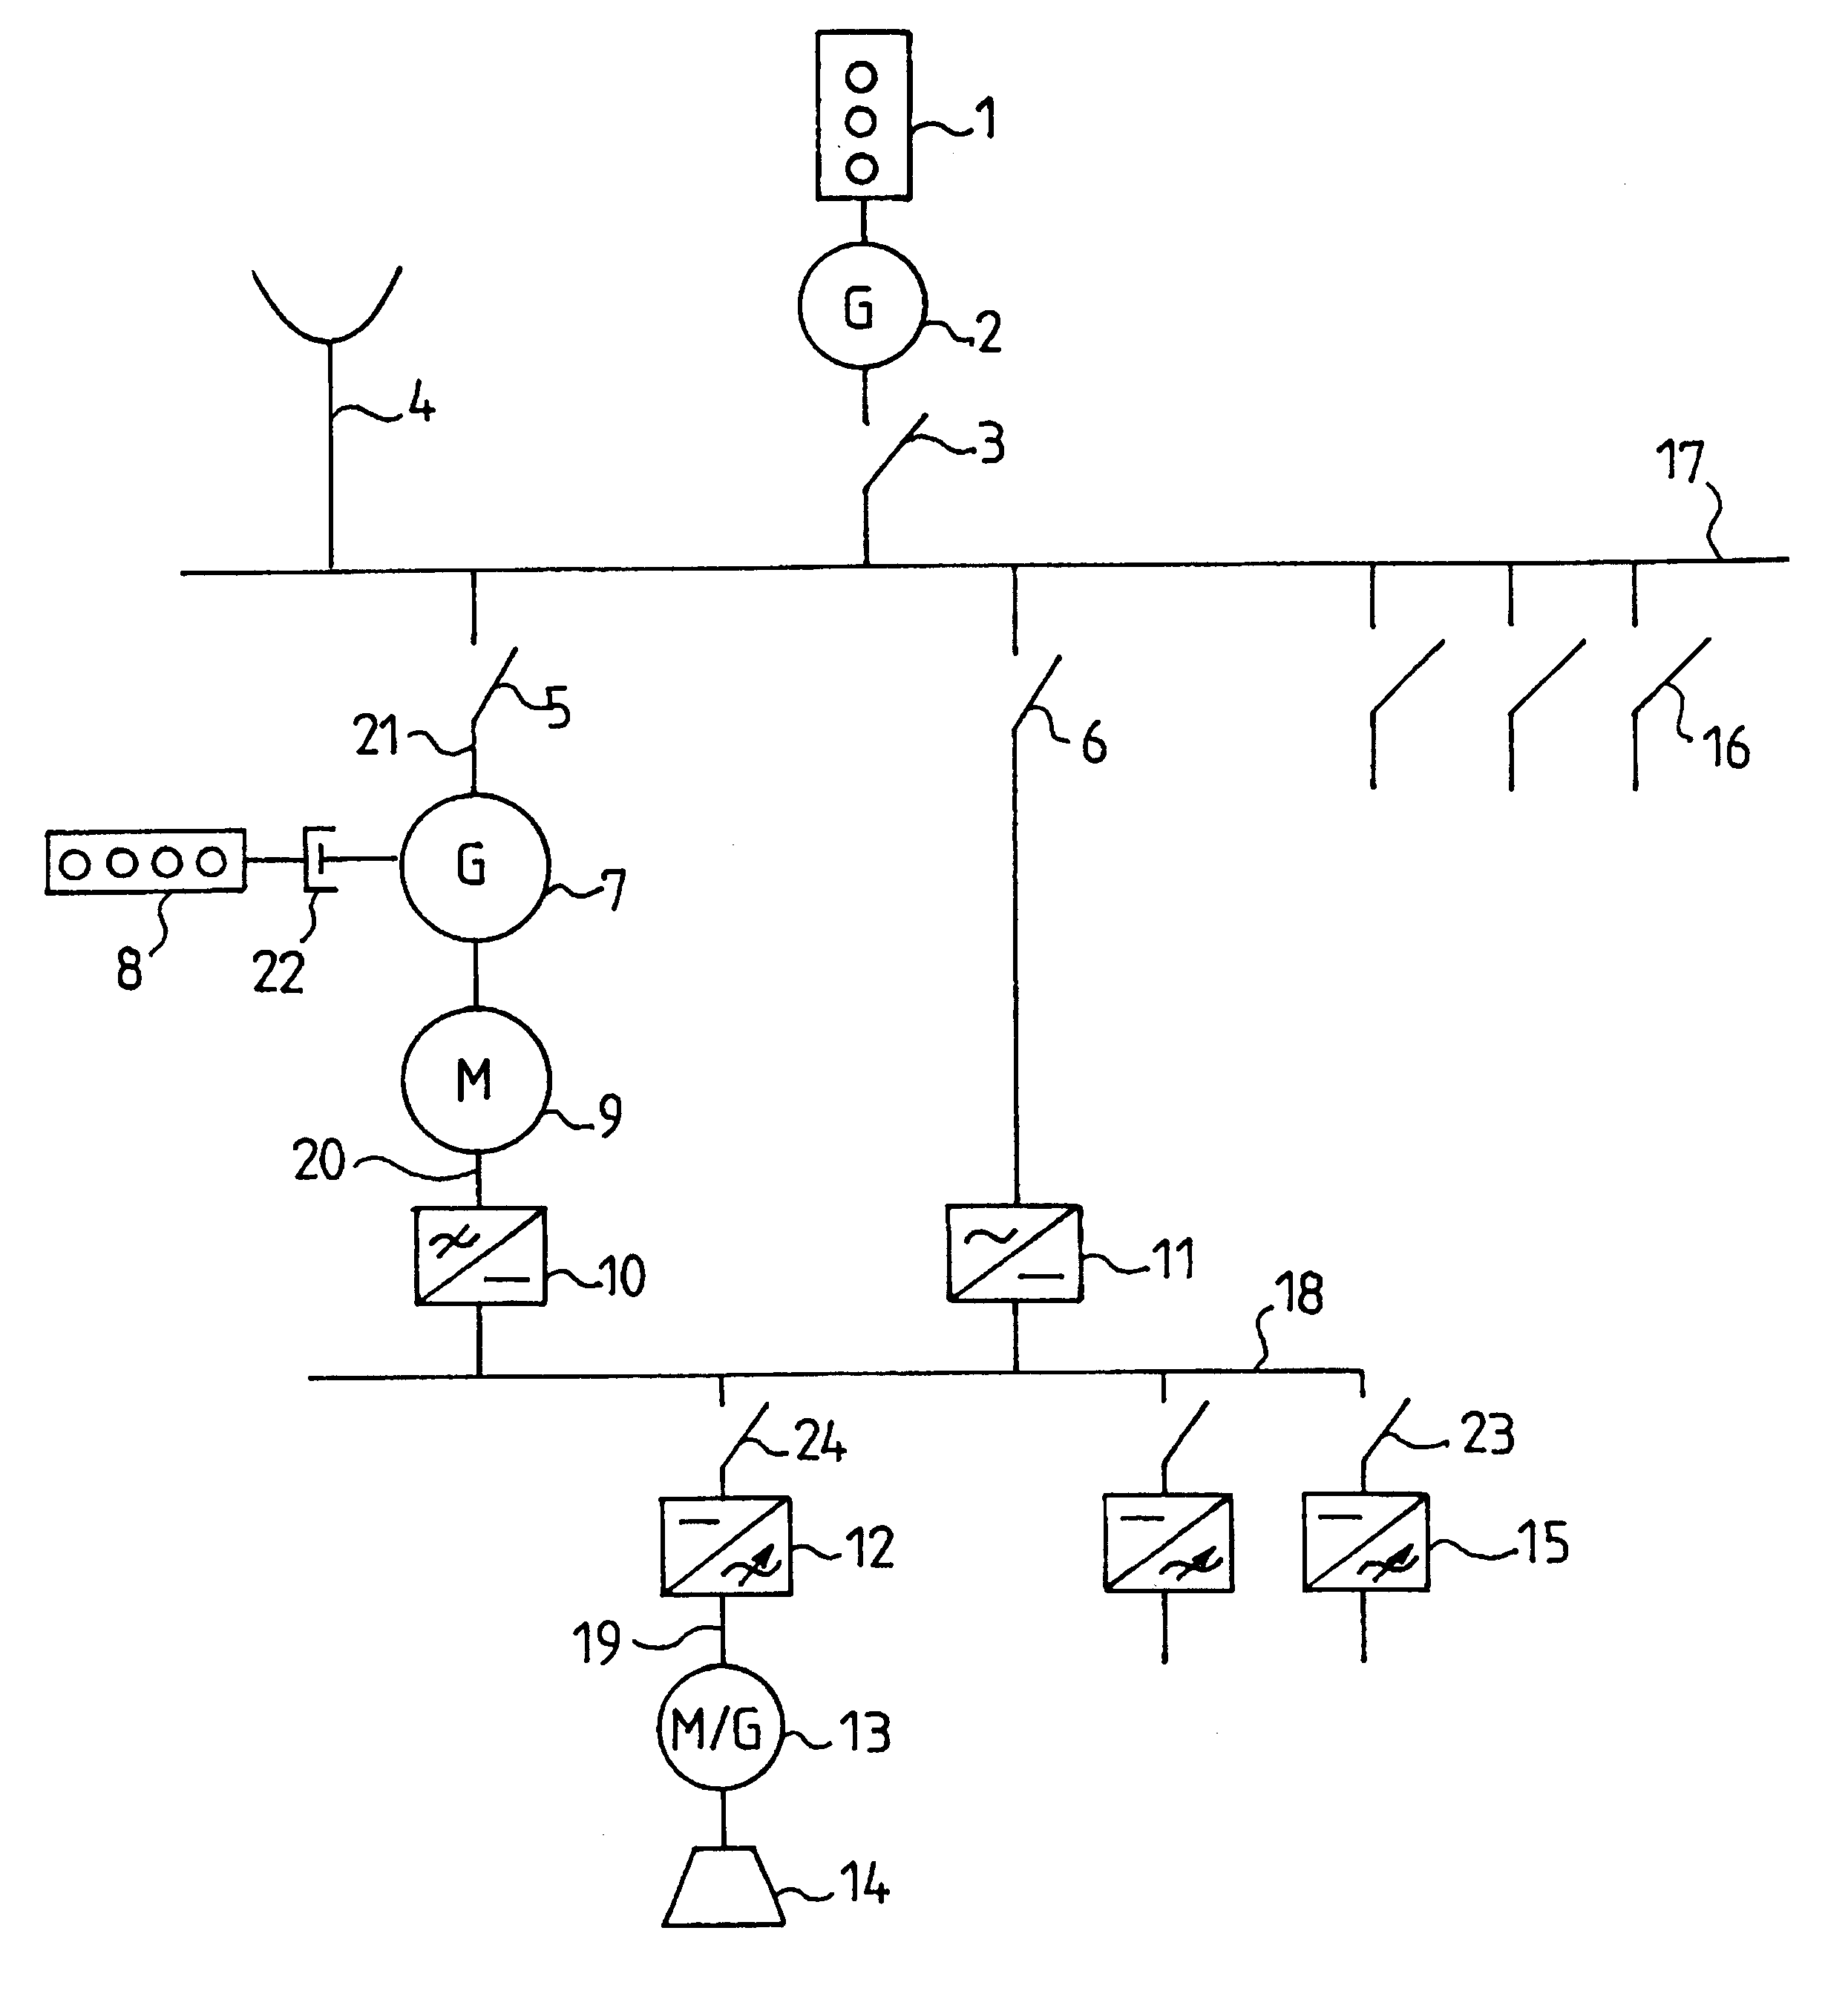 Isolated electrical system including asynchronous machine with prime mover and inverter/rectifier